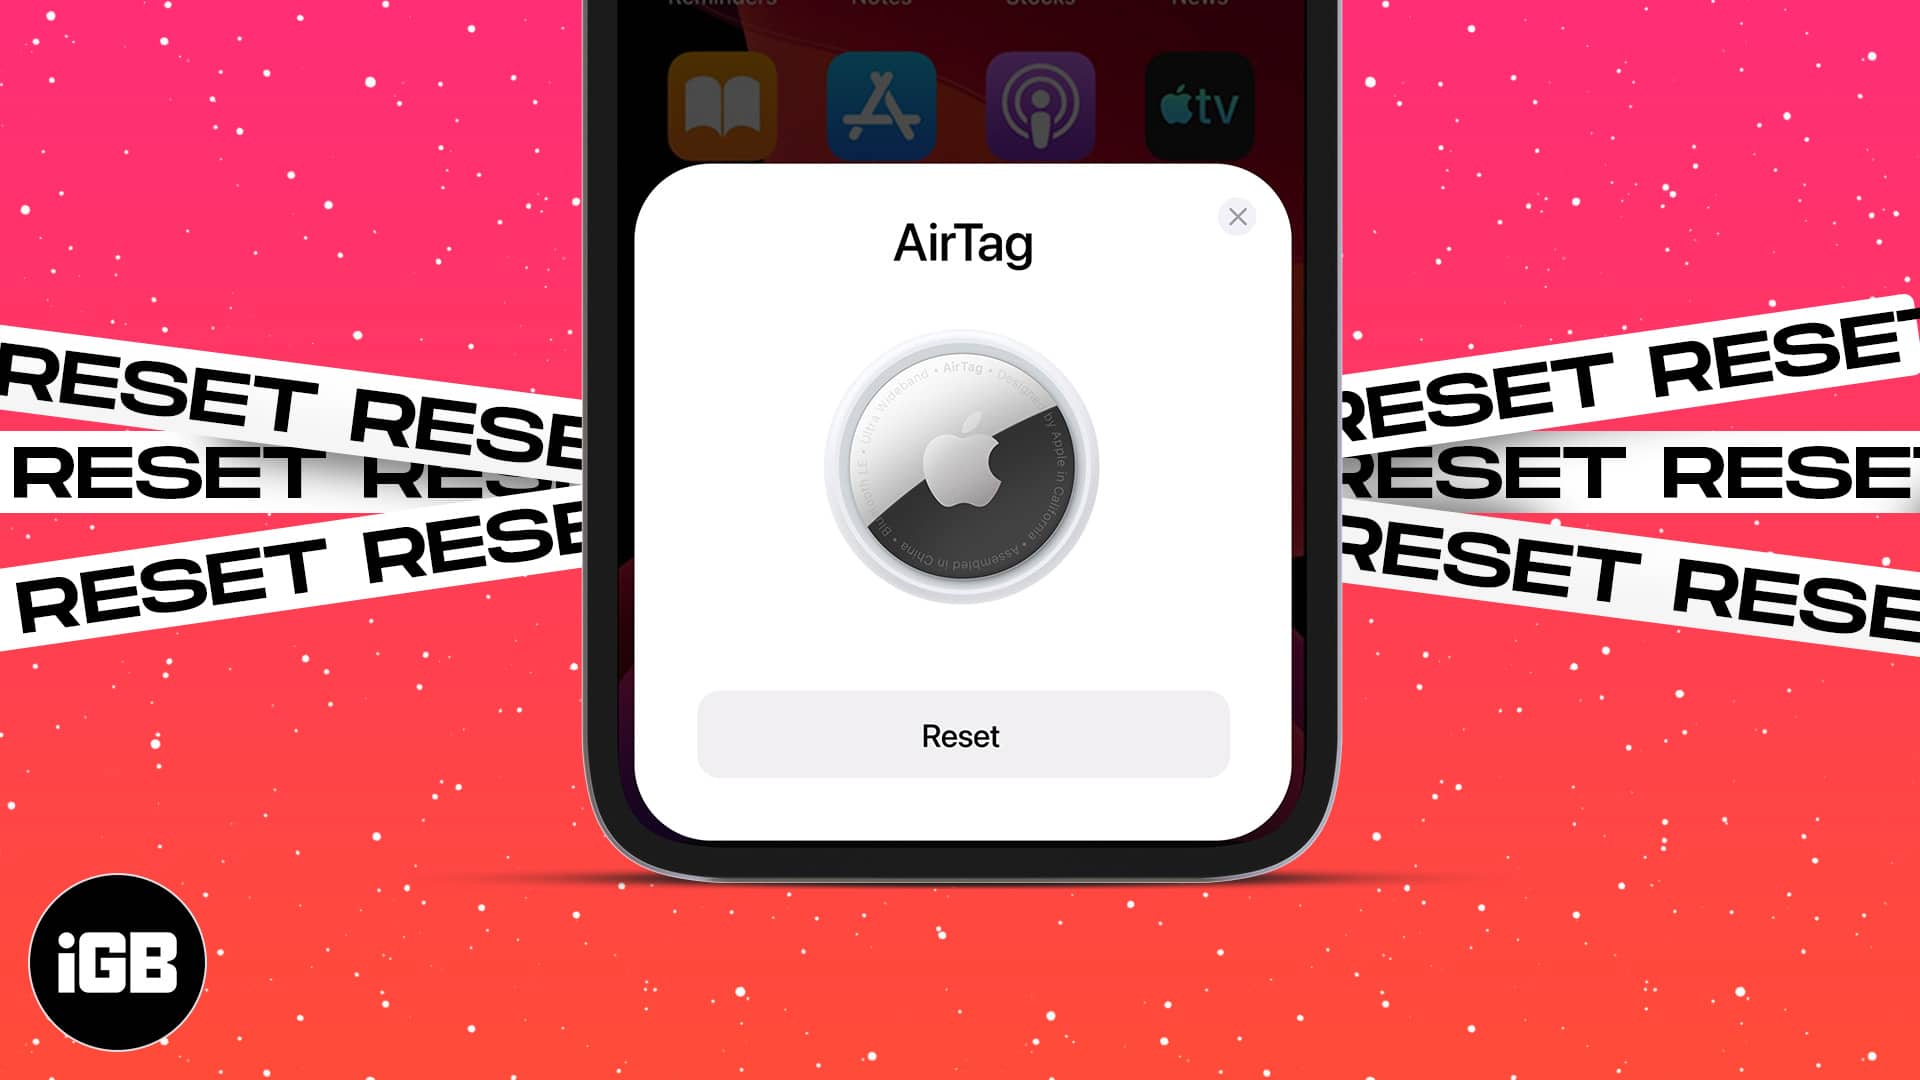 How to reset an AirTag